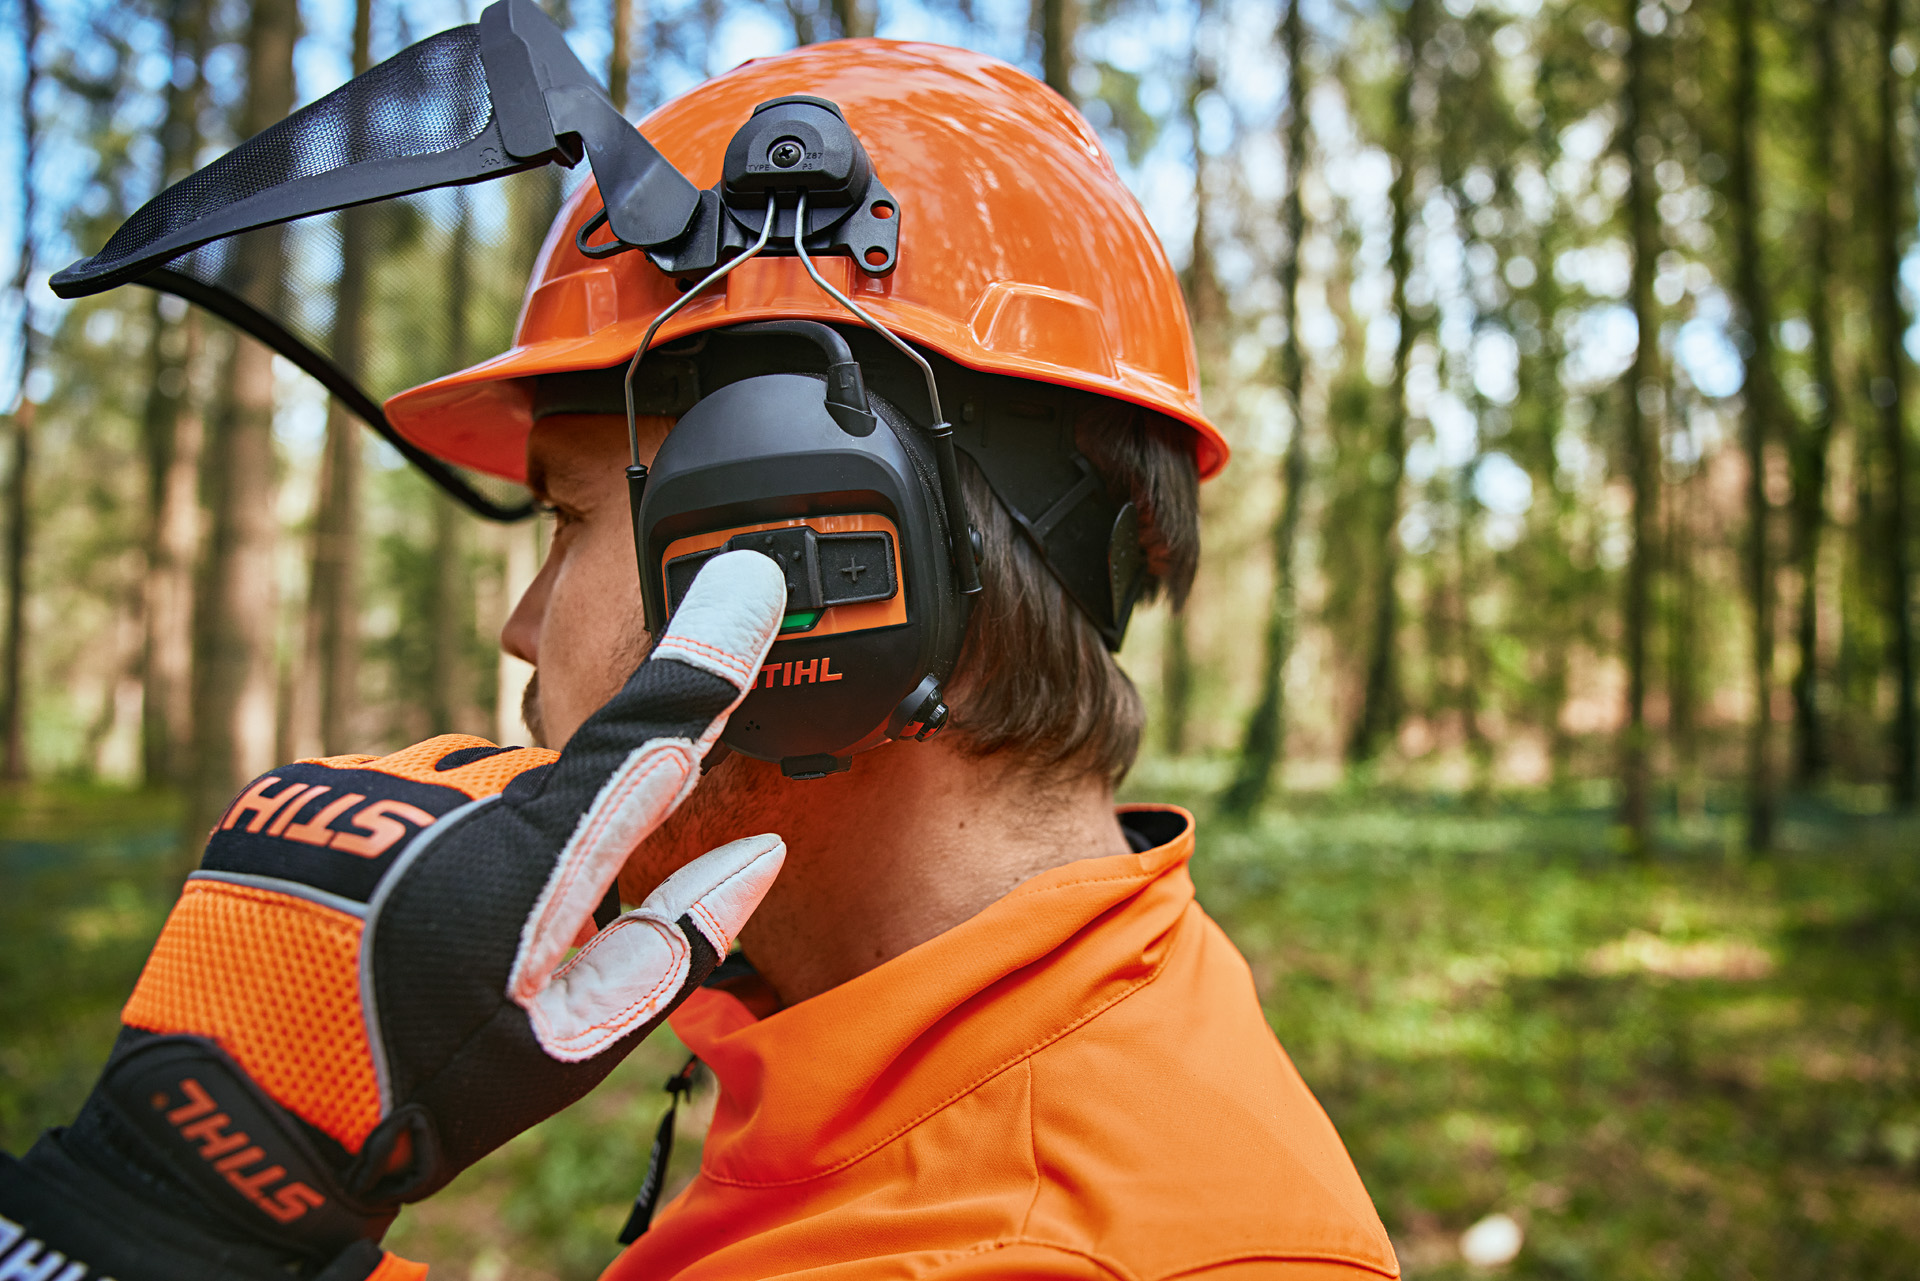 The New ProCom headsets from Stihl